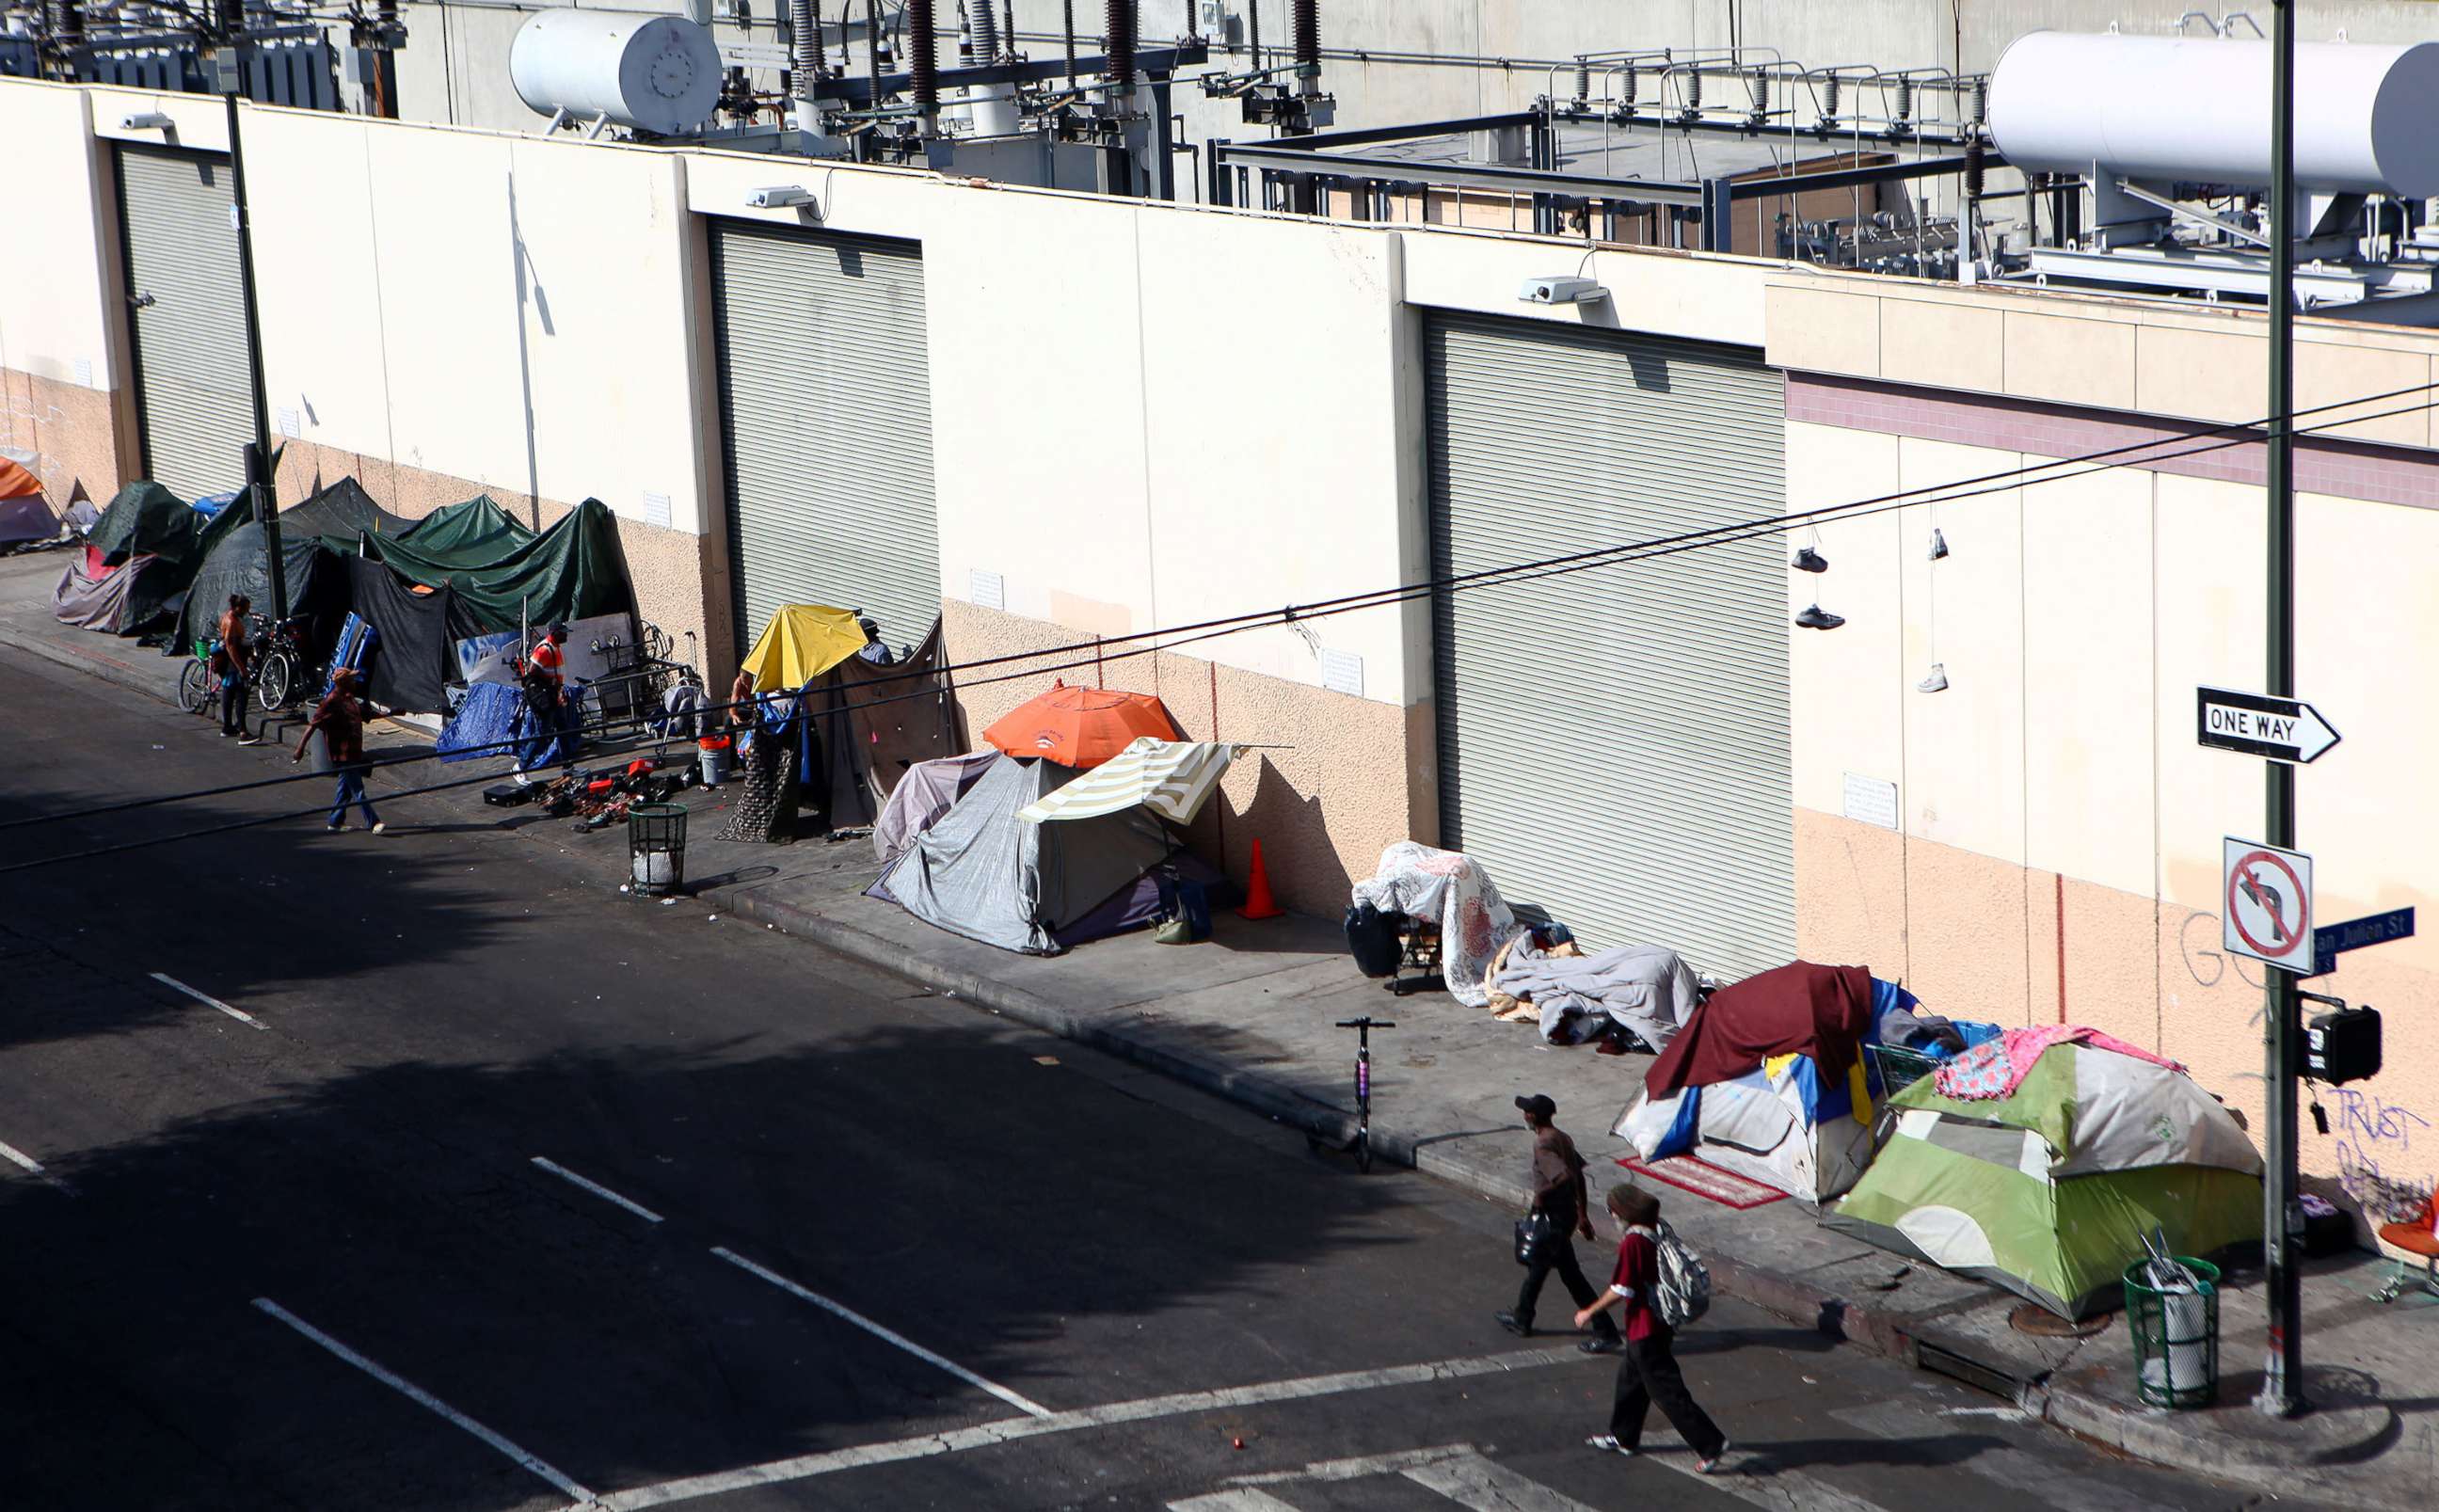 PHOTO: People walk past a homeless tent encampment in Skid Row, Sept. 16, 2019, in Los Angeles.